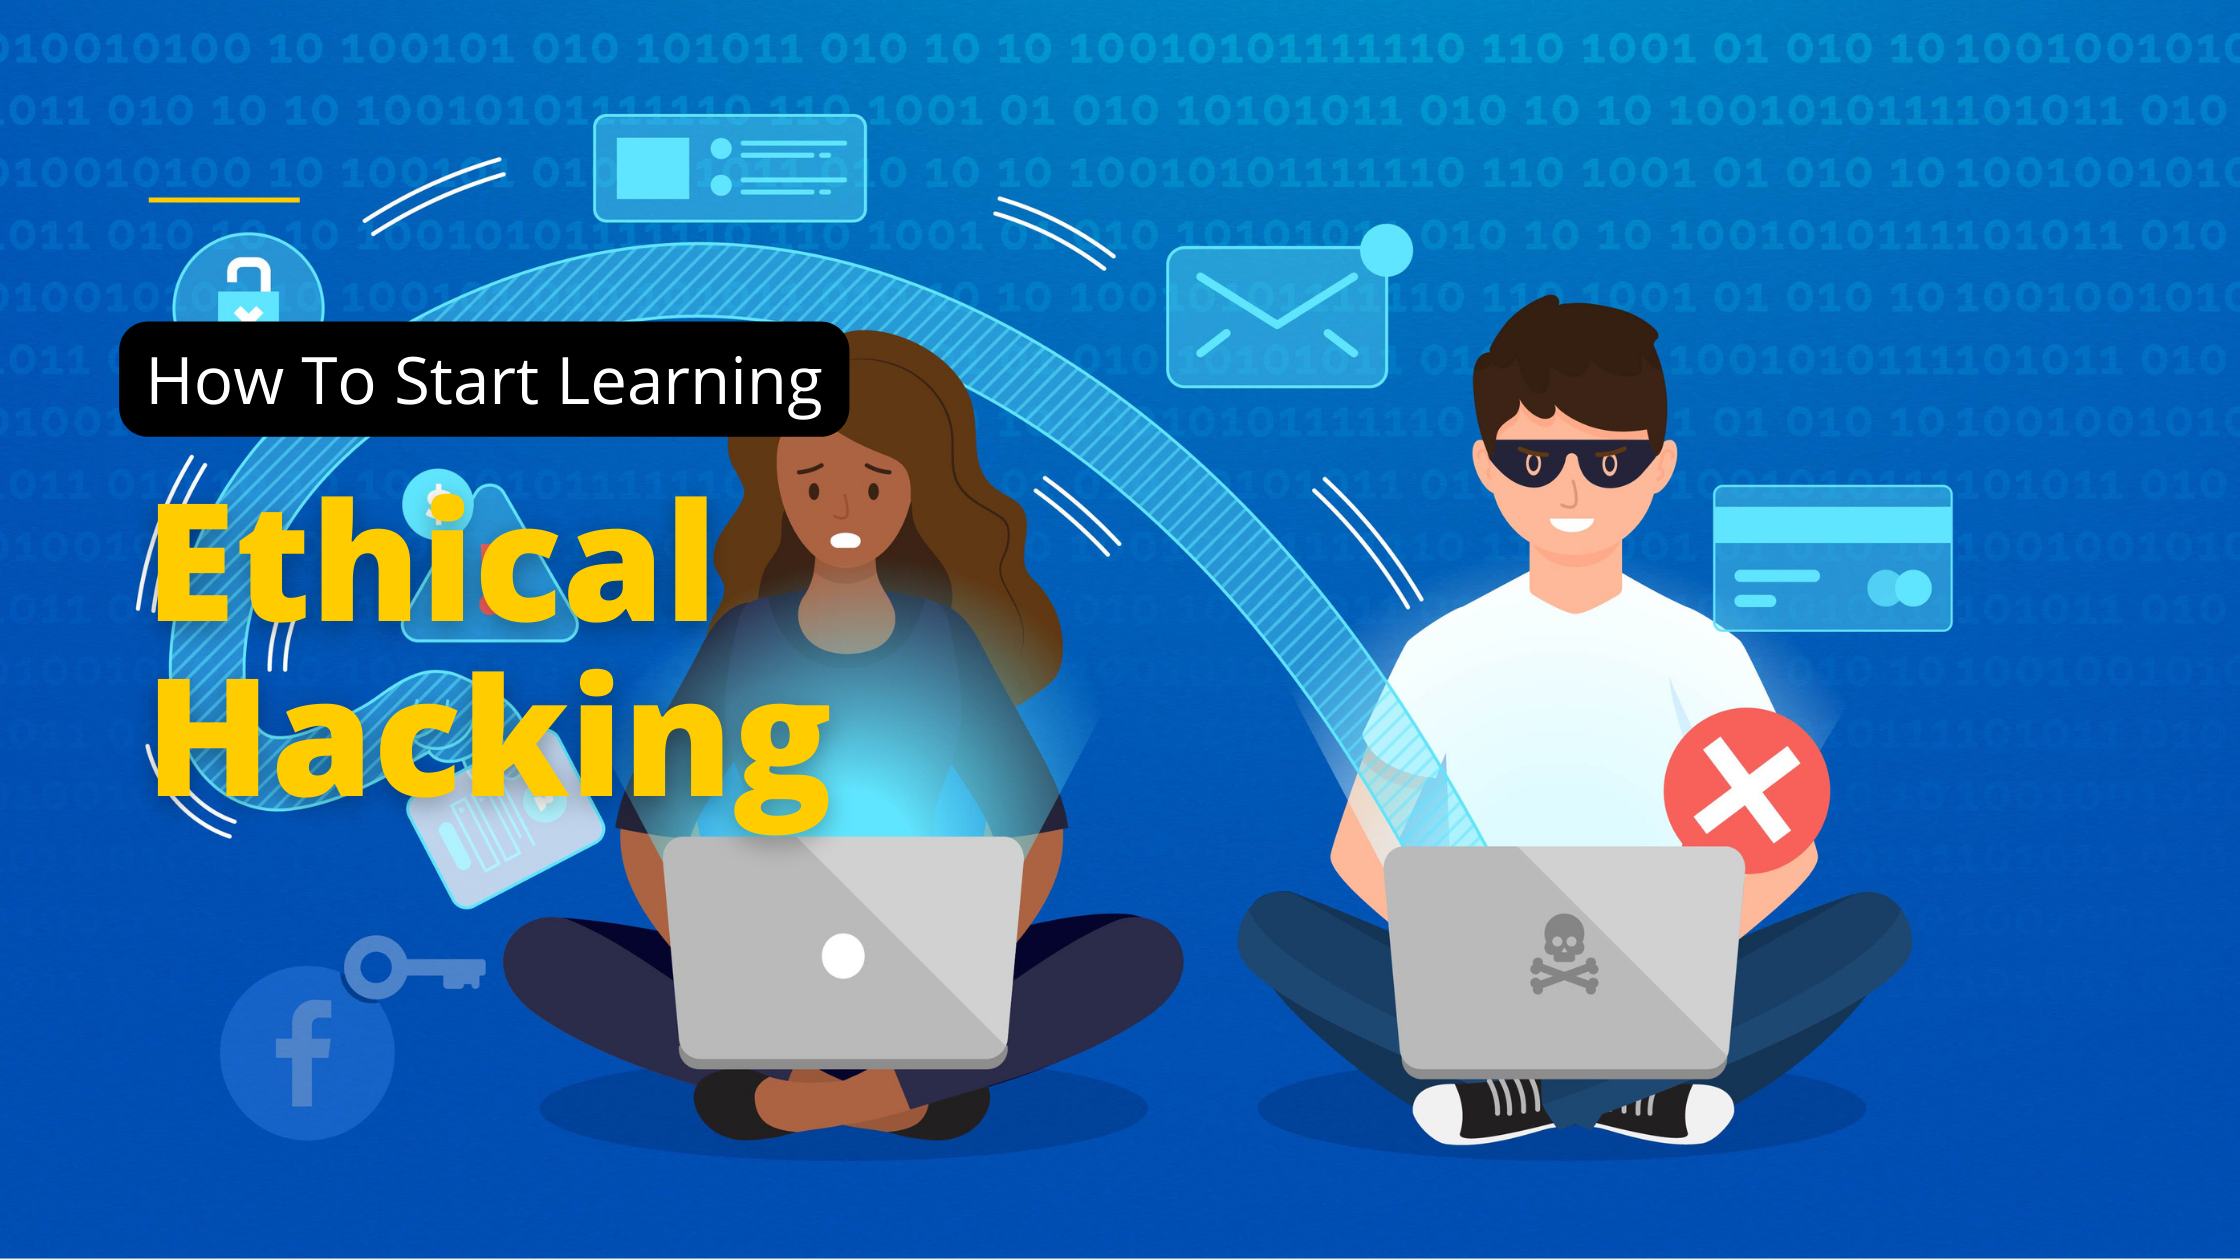 How To Start Learning Ethical Hacking